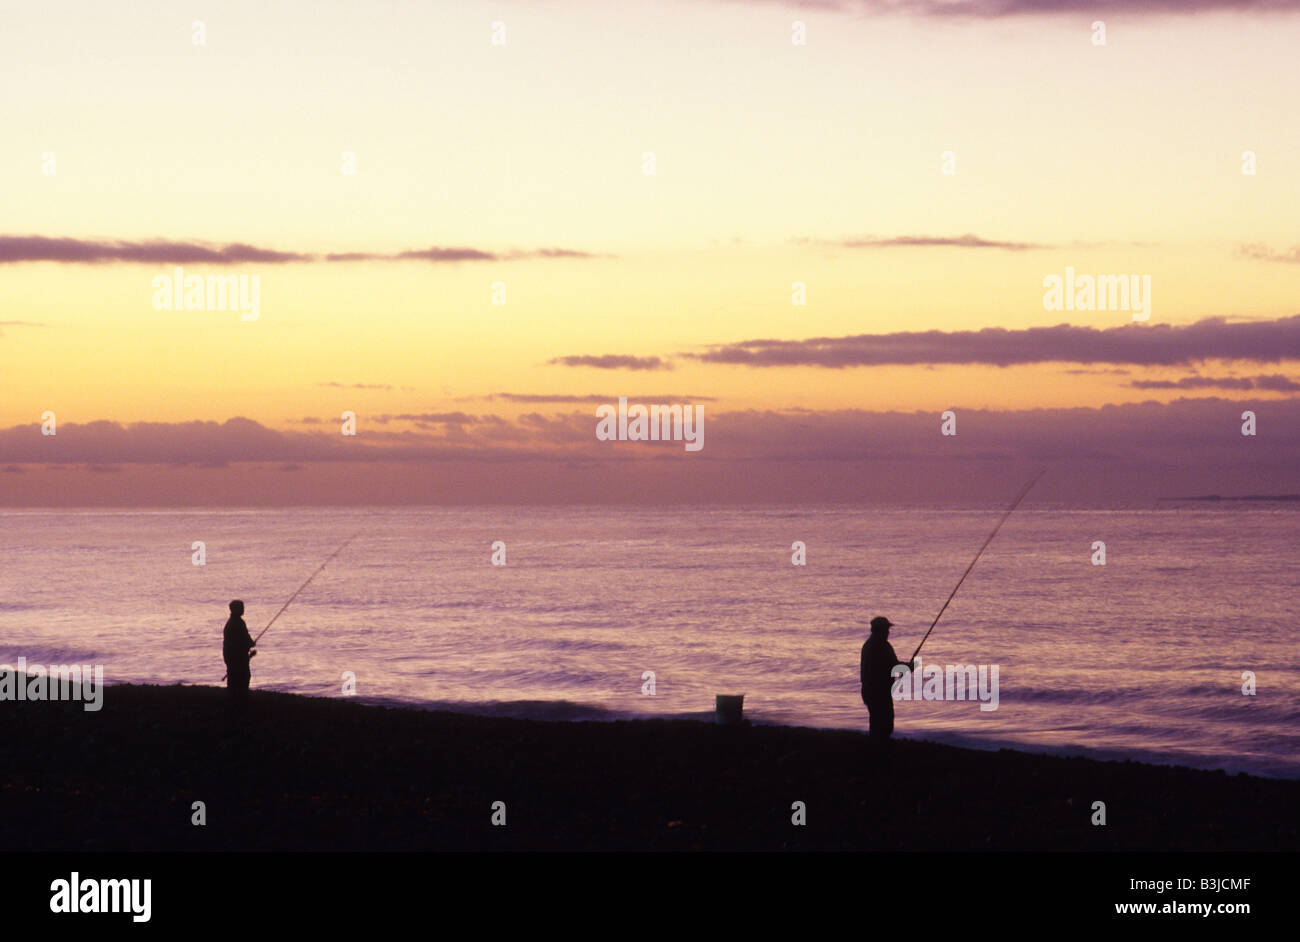 2 Two silhouettes of people surf fishing at sunrise over Misquamicut Beach in Westerly, Rhode Island USA. Stock Photo